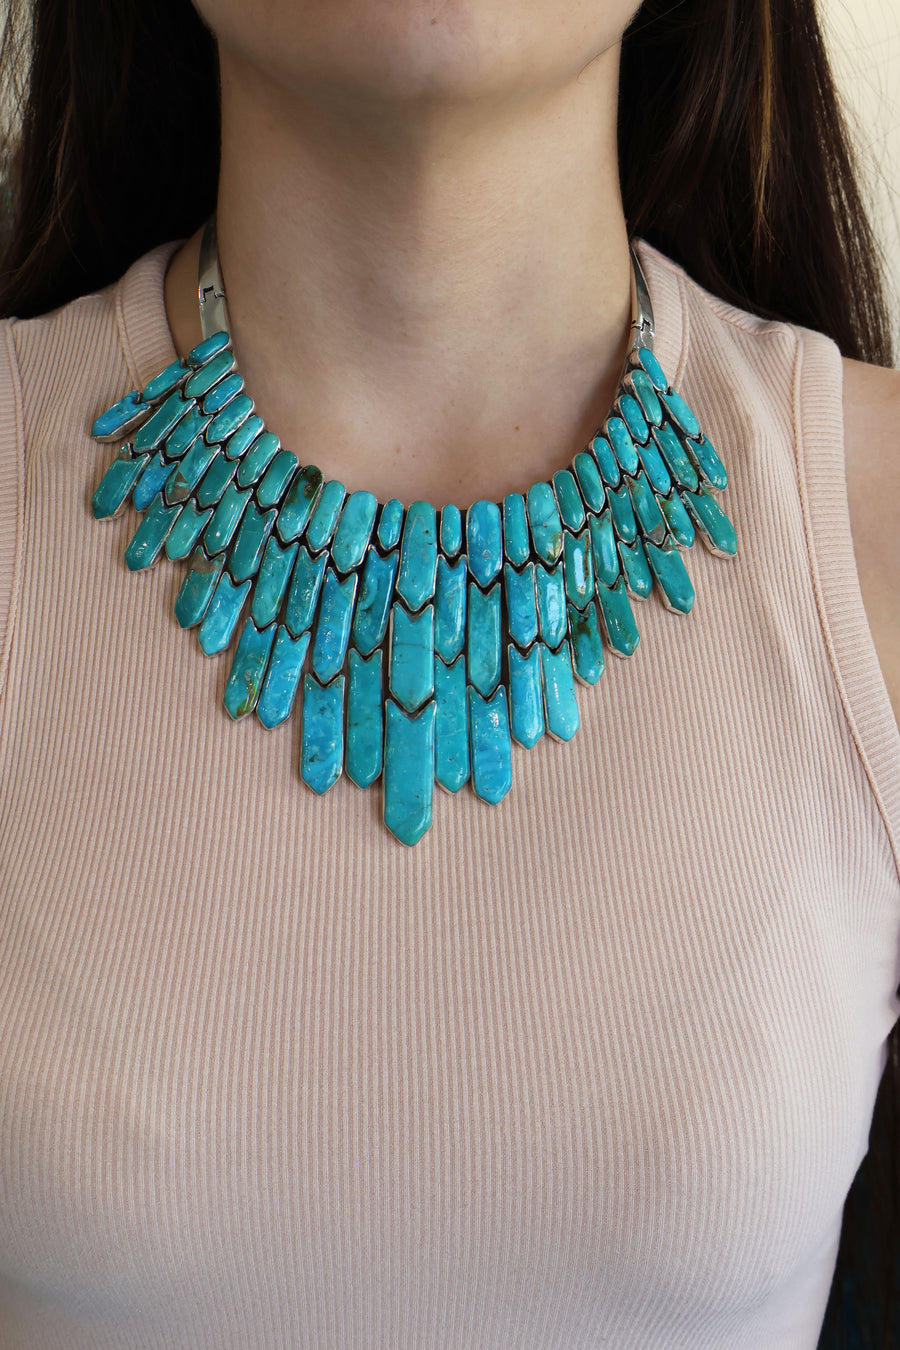 The Catalina Statement Necklace